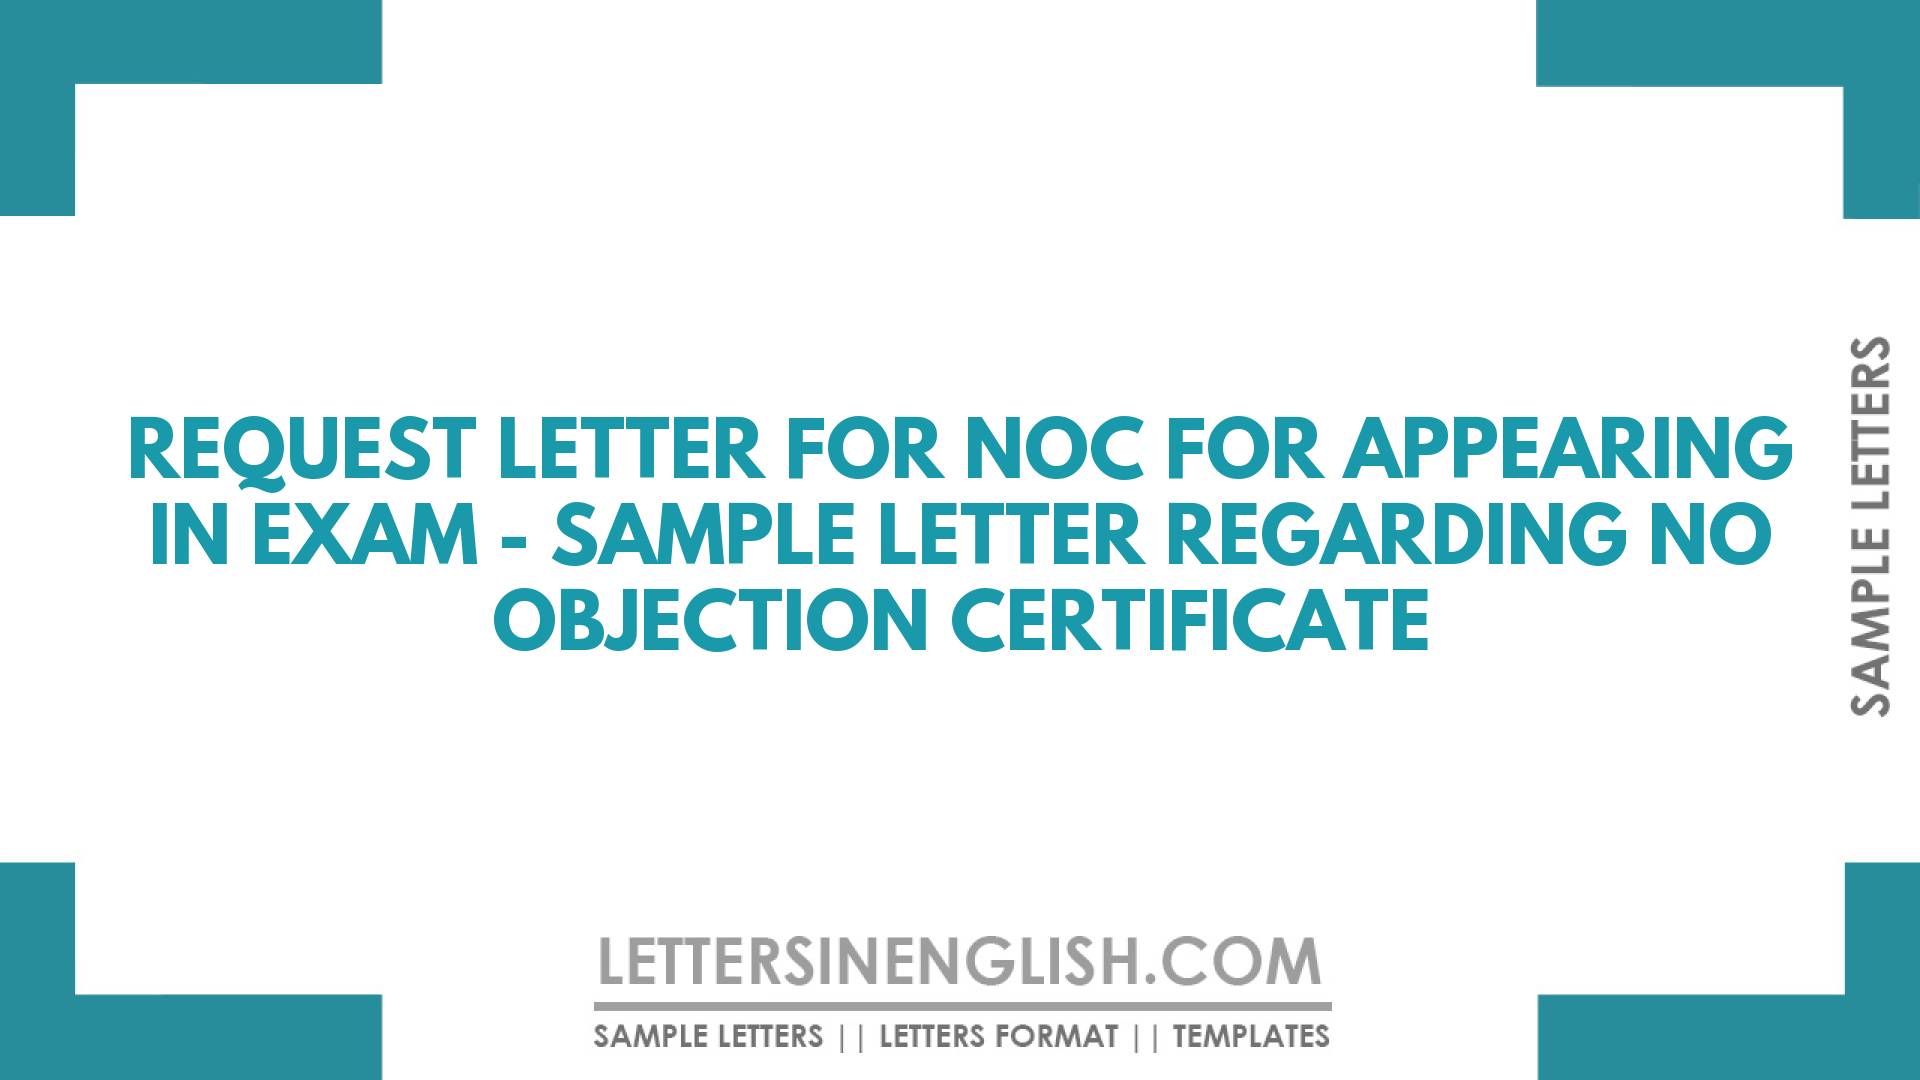 Request Letter for NOC for Appearing in Exam – Sample Letter Regarding No Objection Certificate